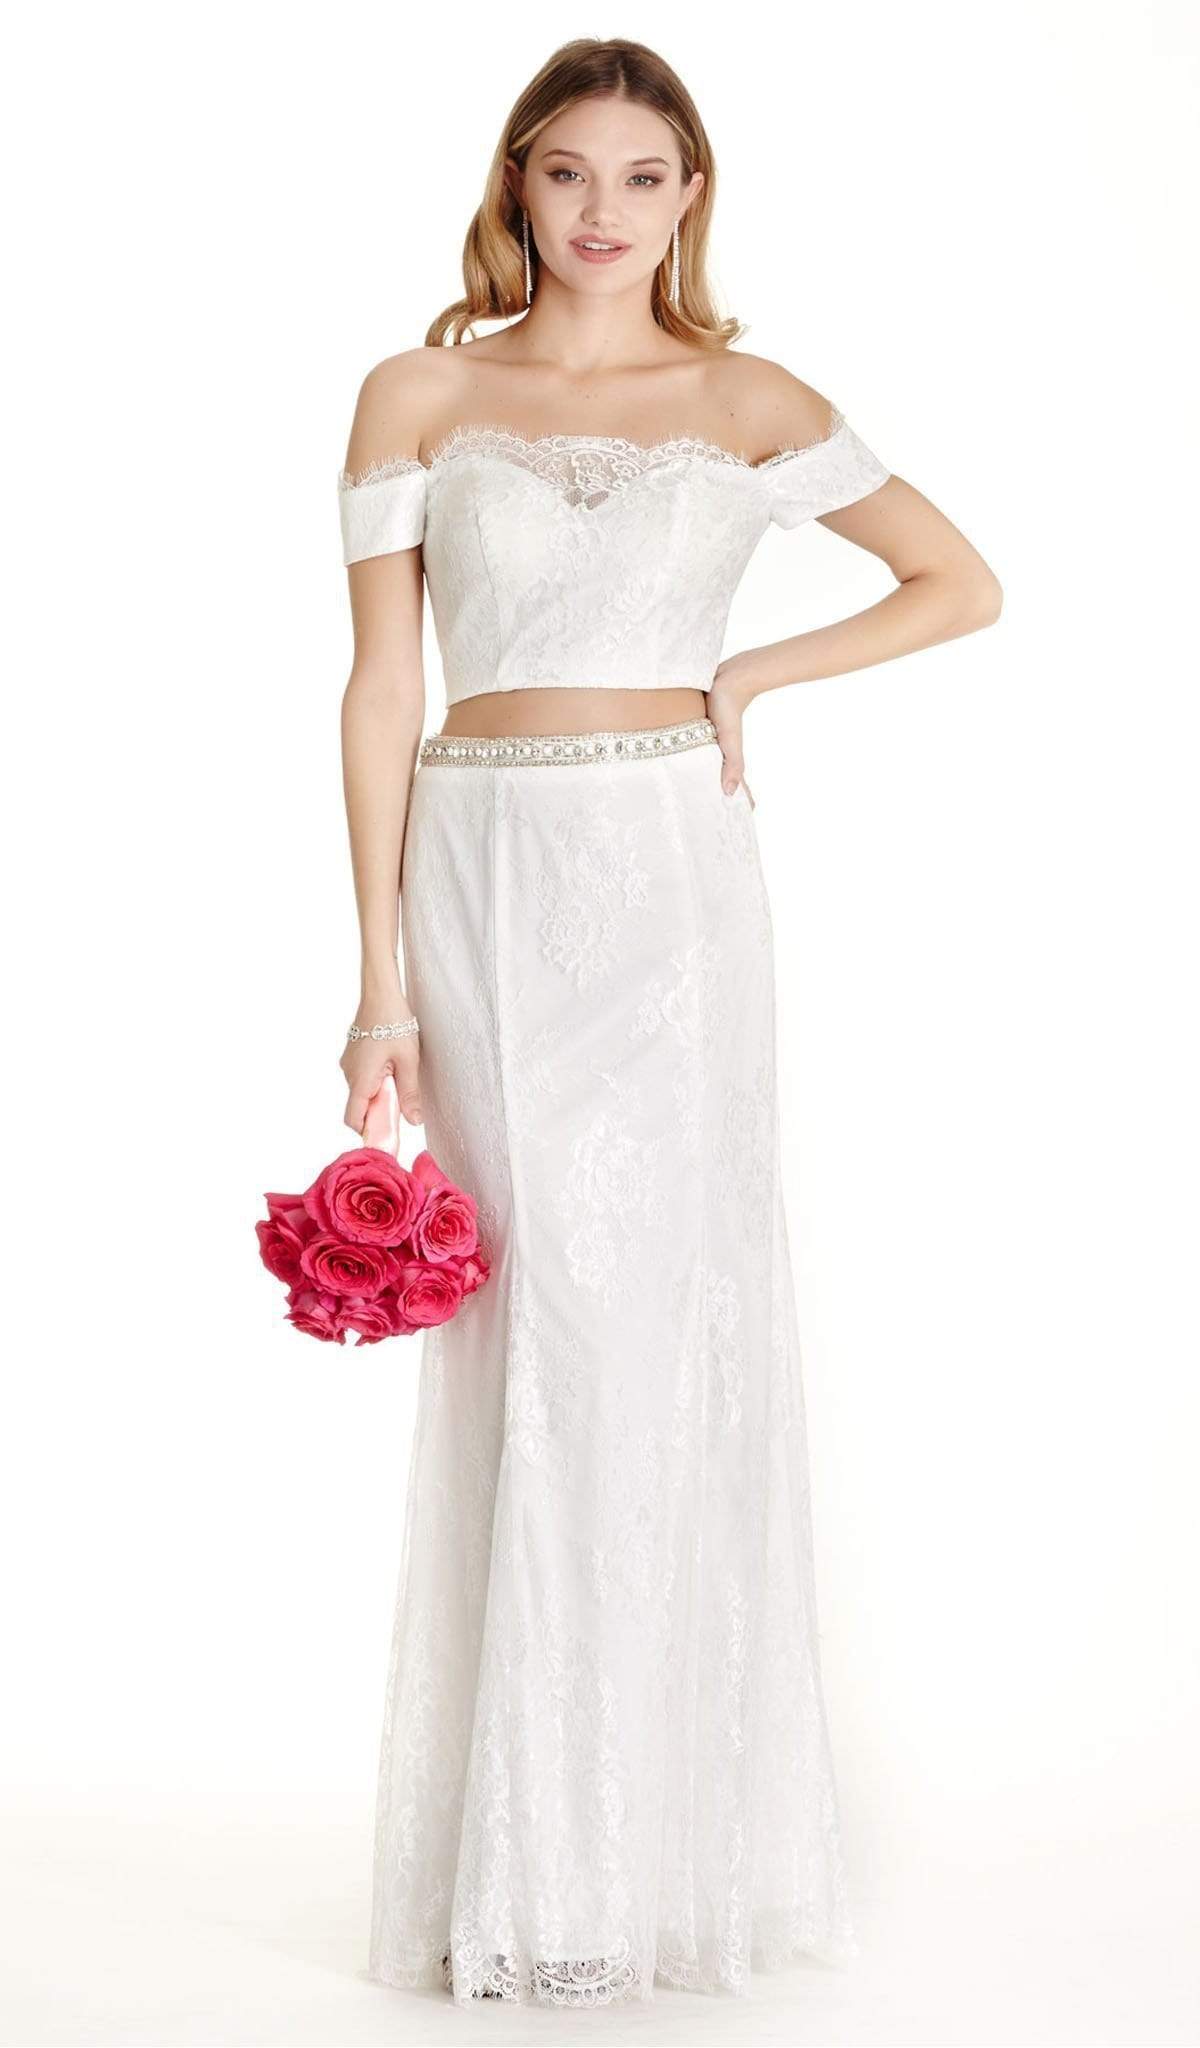 Aspeed Design - Two Piece Lace Off-Shoulder Sheath Prom Dress
